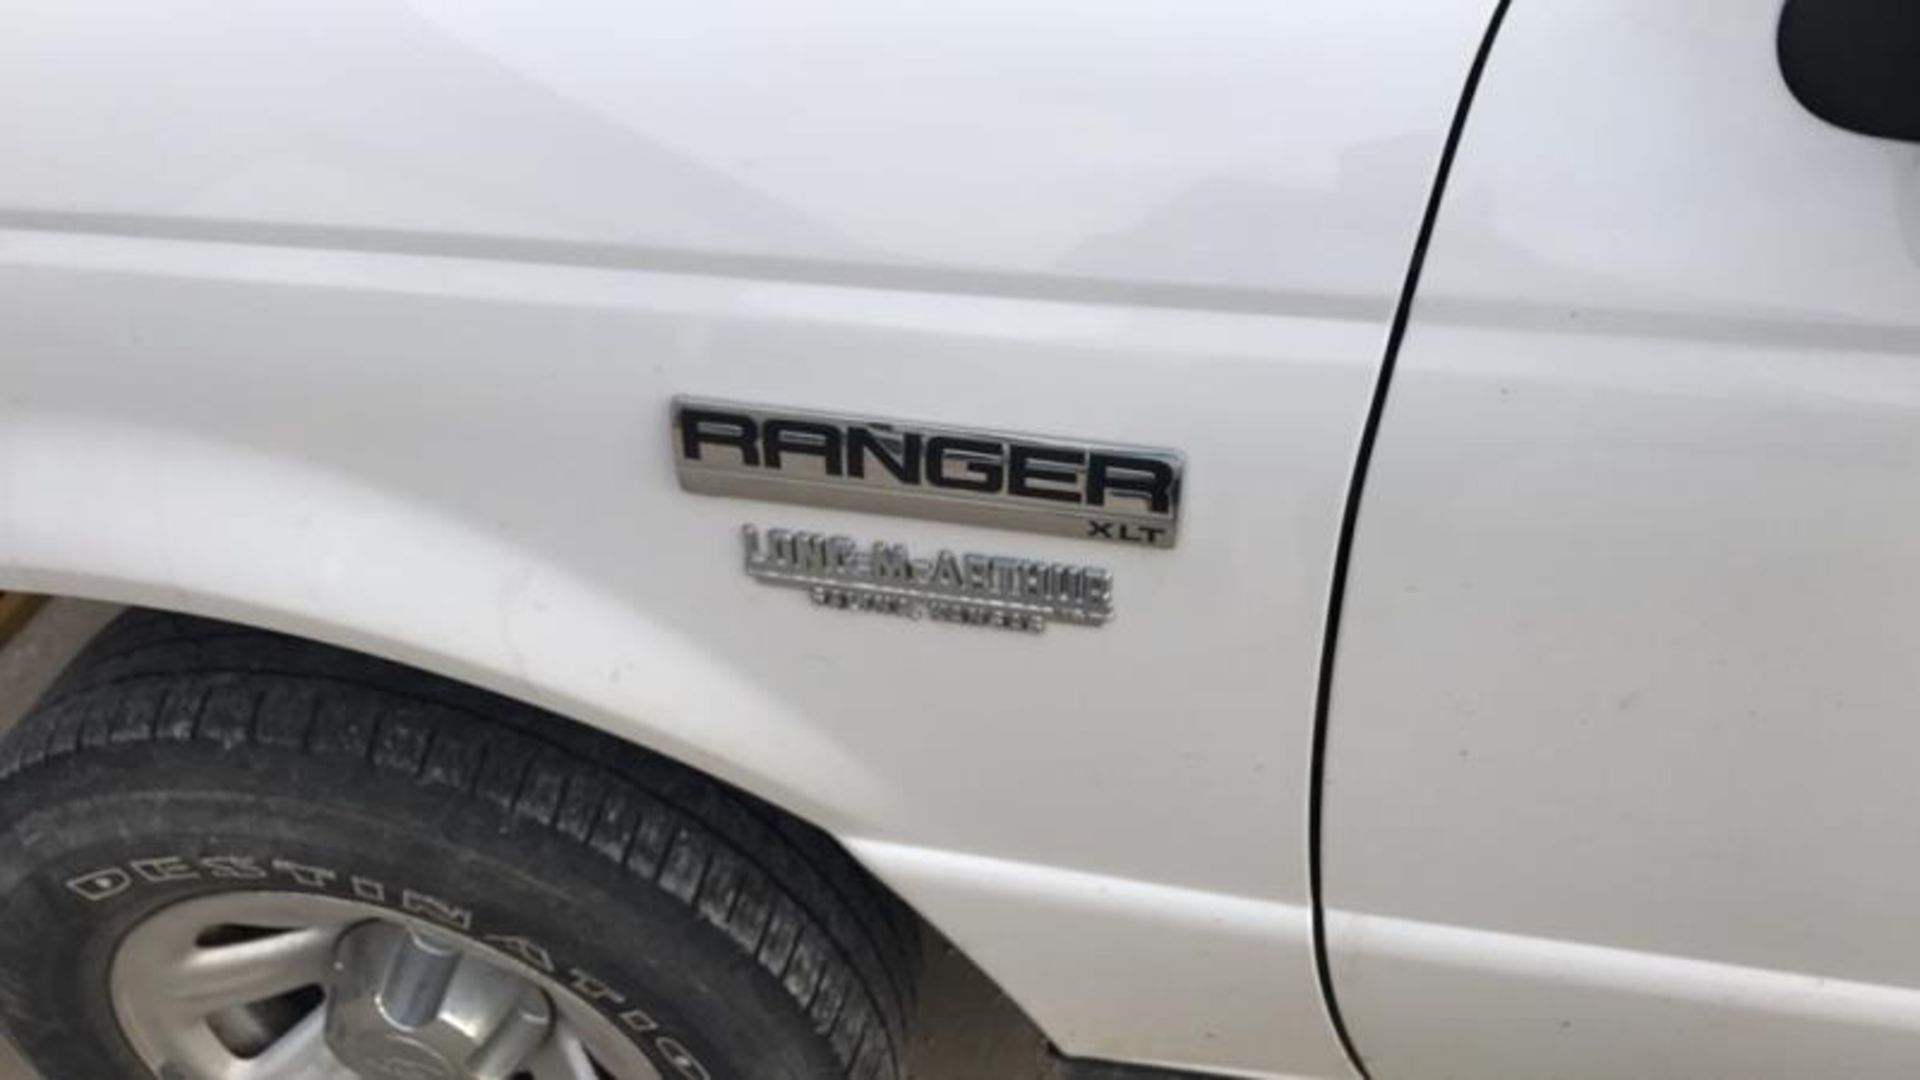 2009 Ford Ranger Supercab 4x2 XLT, 5 speed manual transmission. Sticker price $18,515.00, 90,0660 - Image 6 of 20